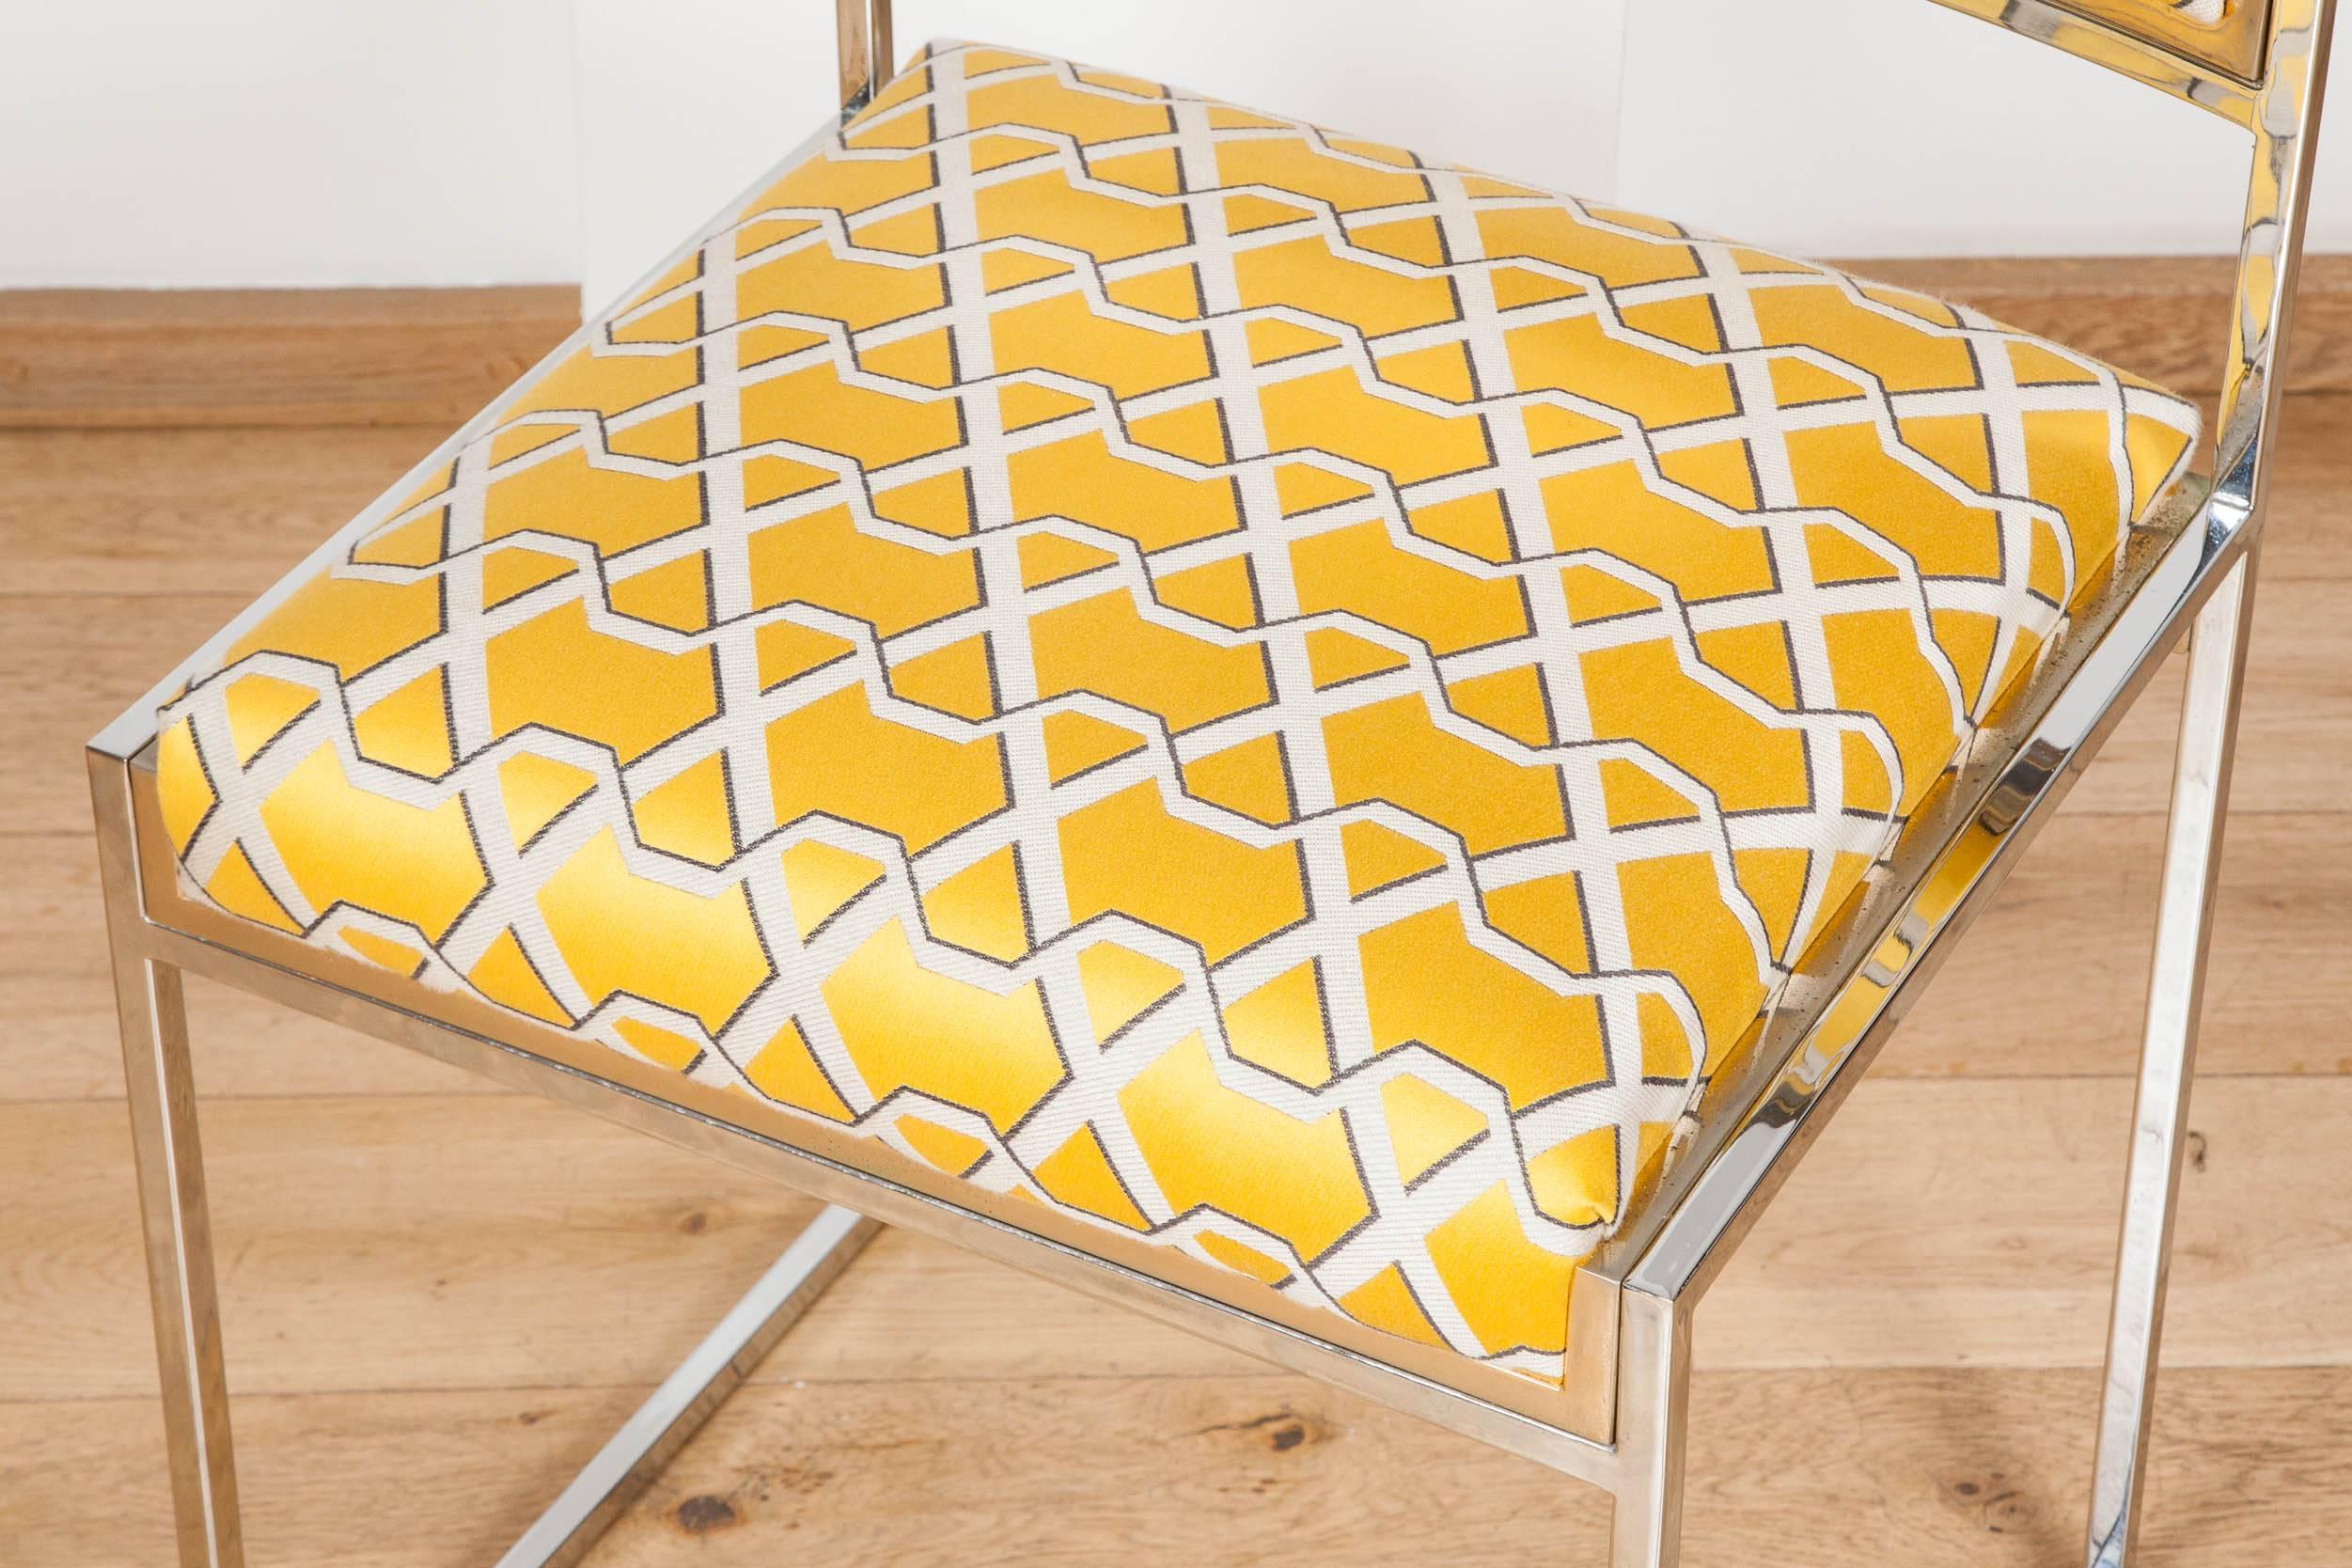 Polished metal edged in brass dining chairs, re-upholstered in yellow fabric with geometric pattern.